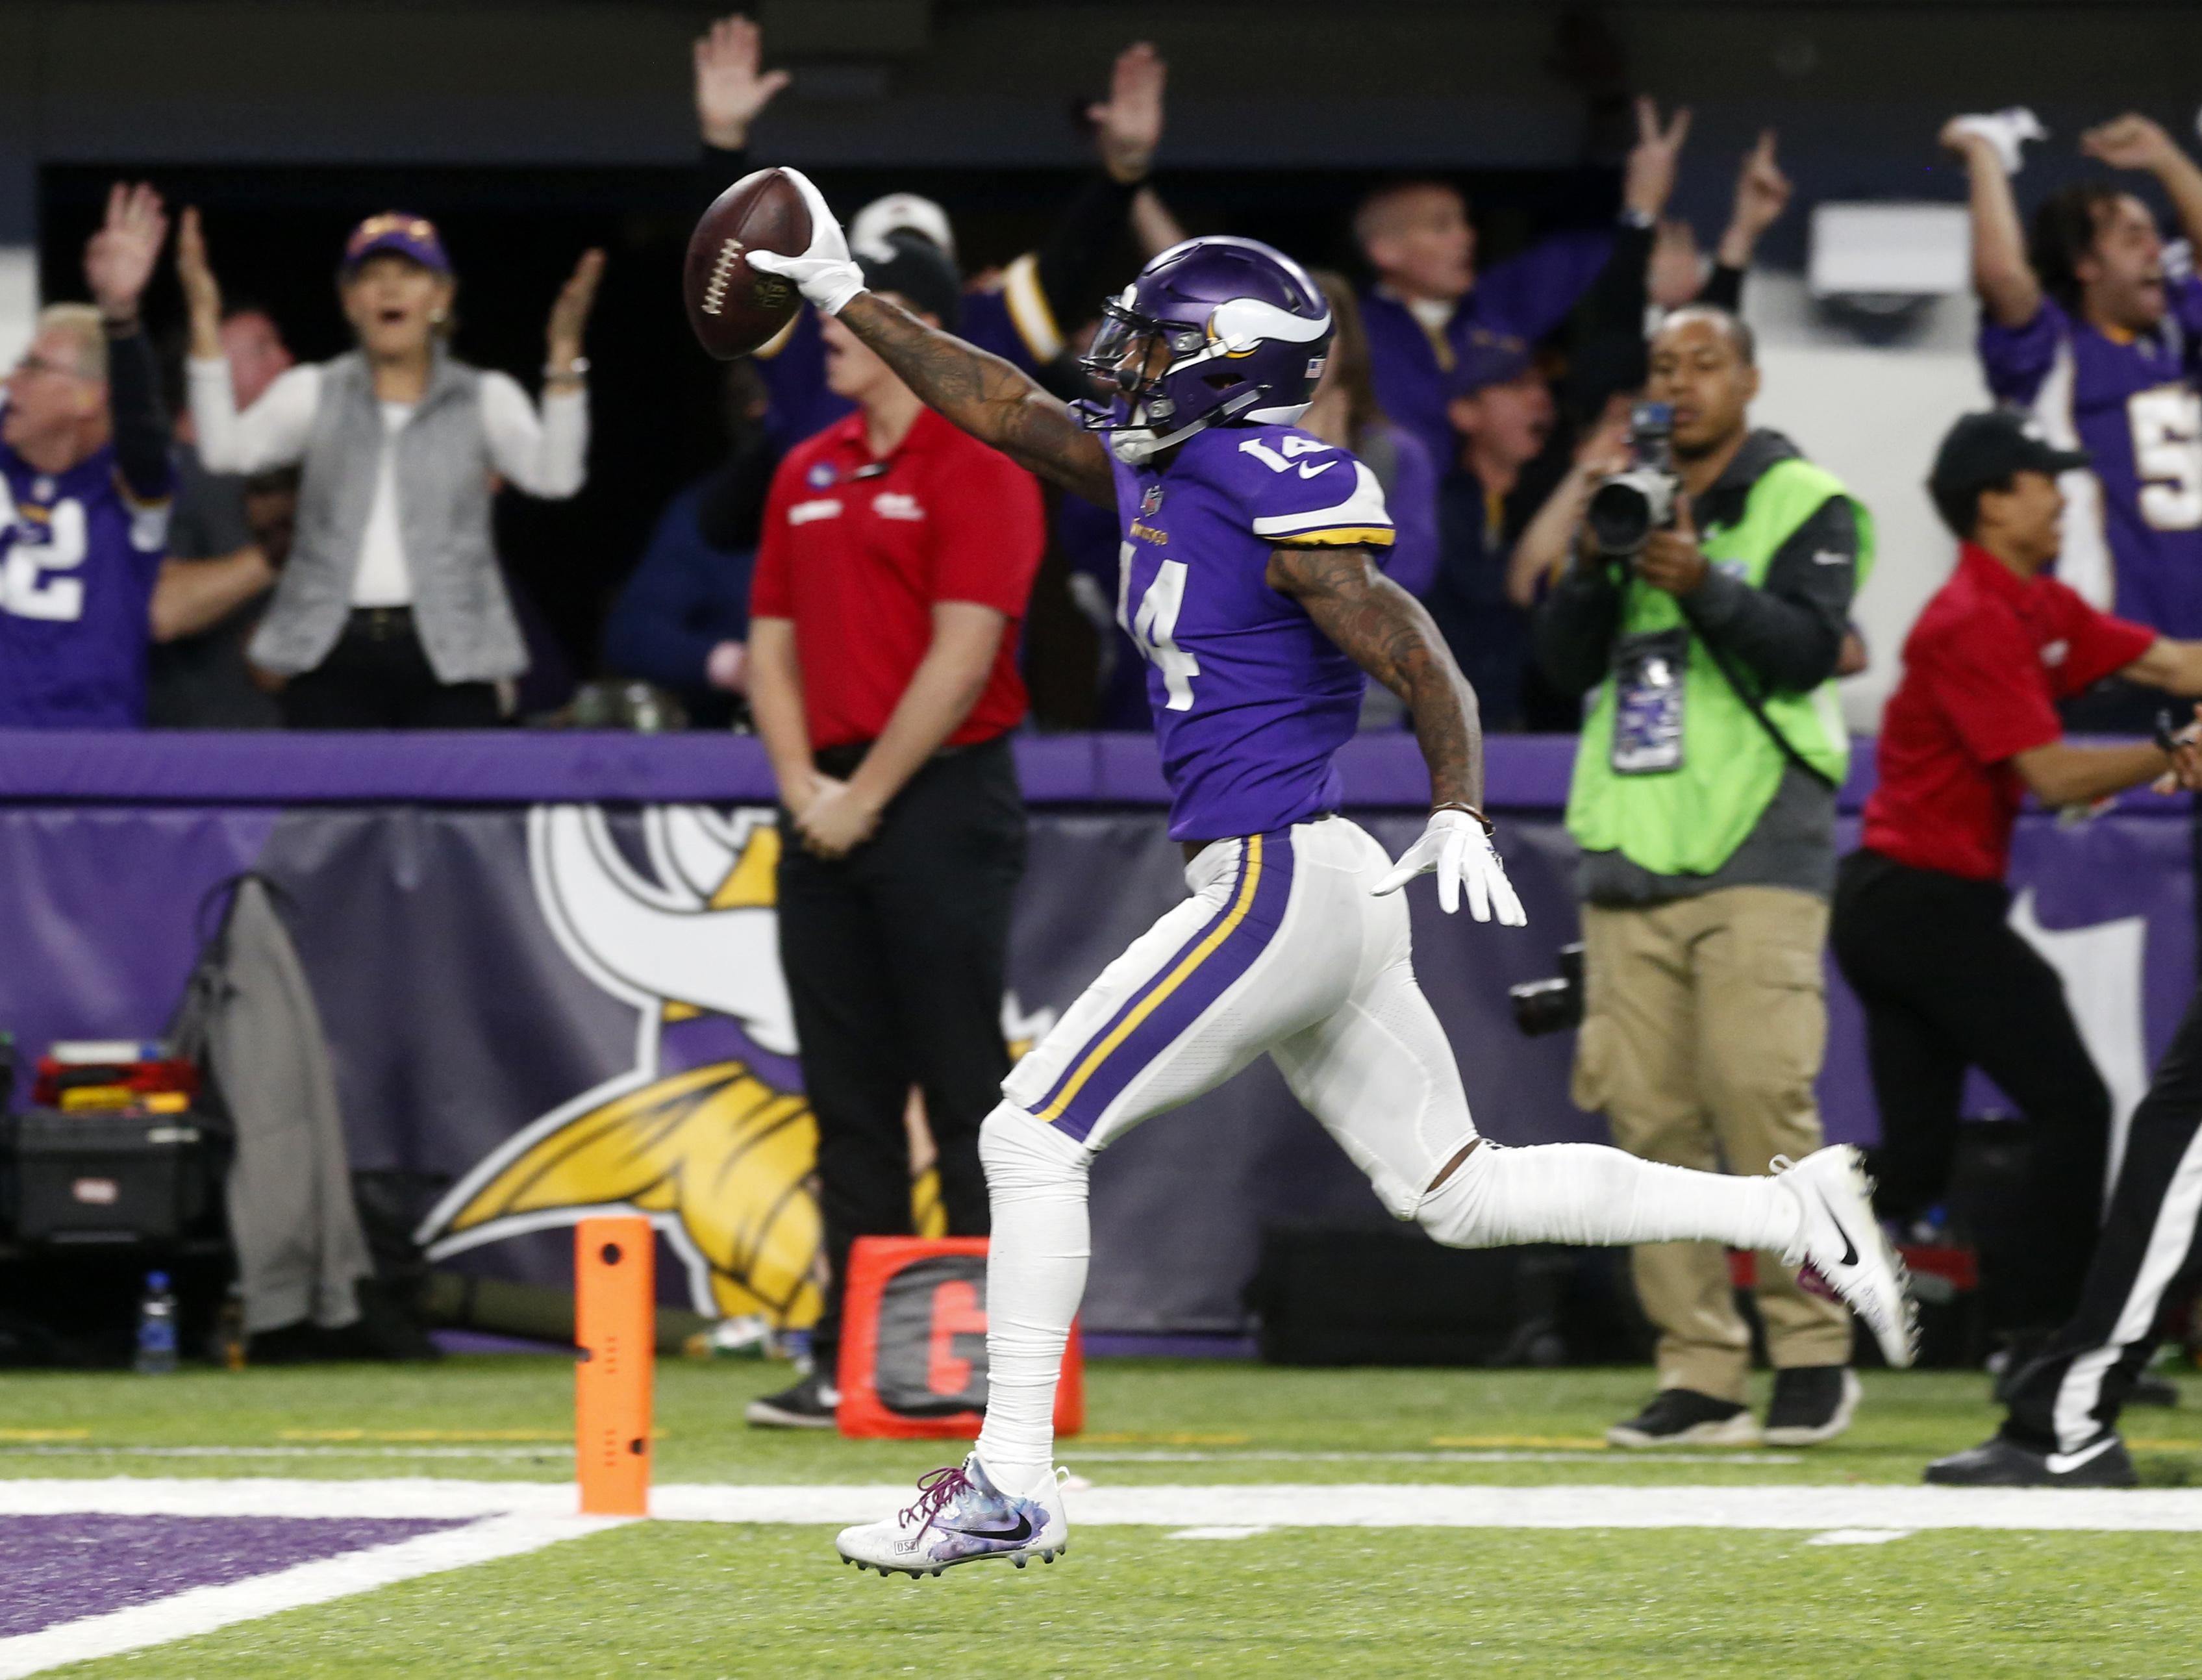 Giants outlast Vikings 31-24 for 1st playoff win in 11 years